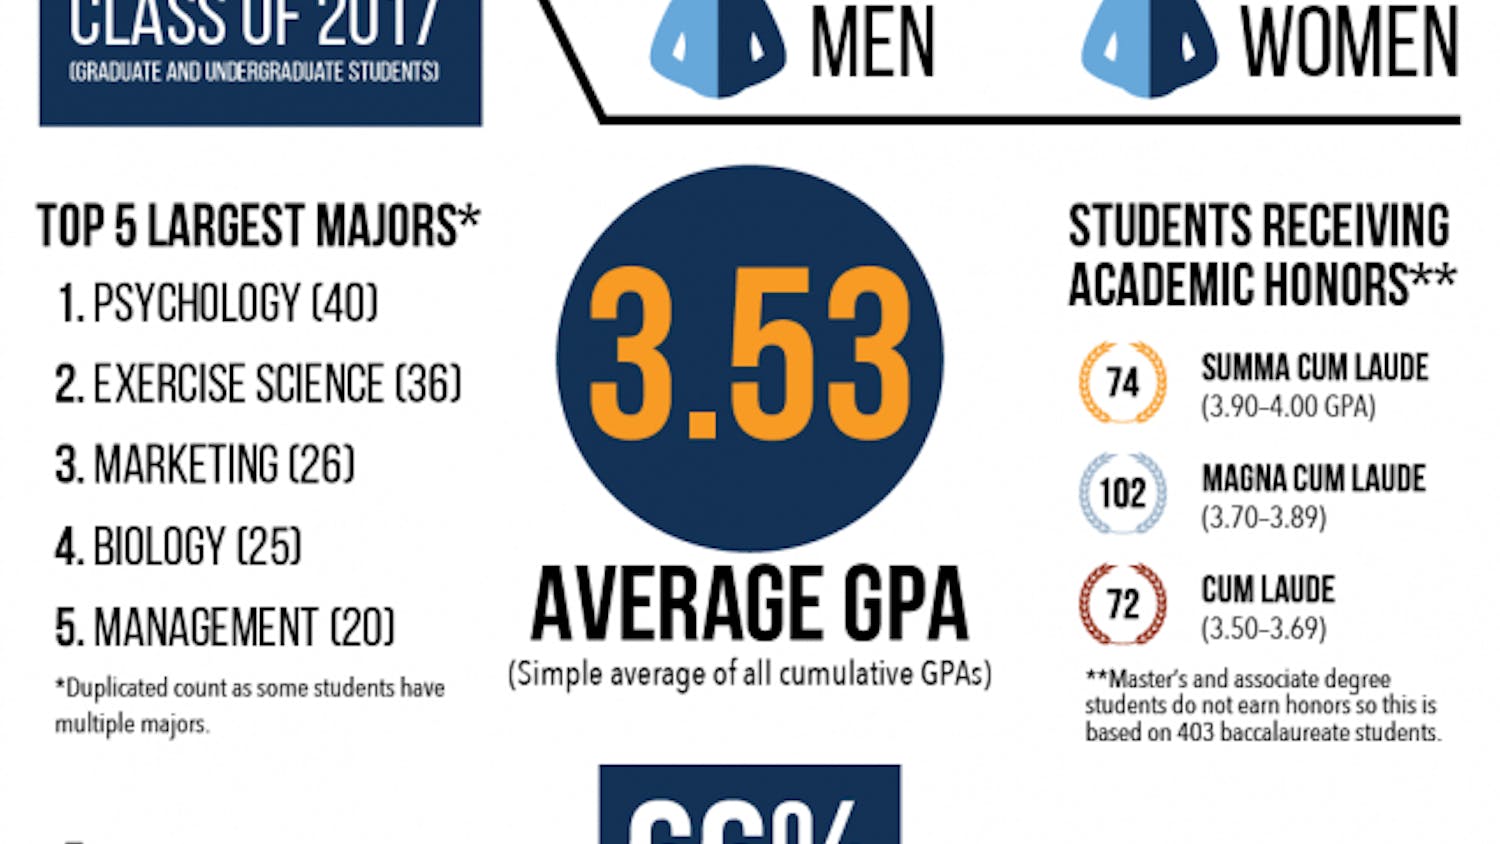 Class-of-2017-Infographic.png